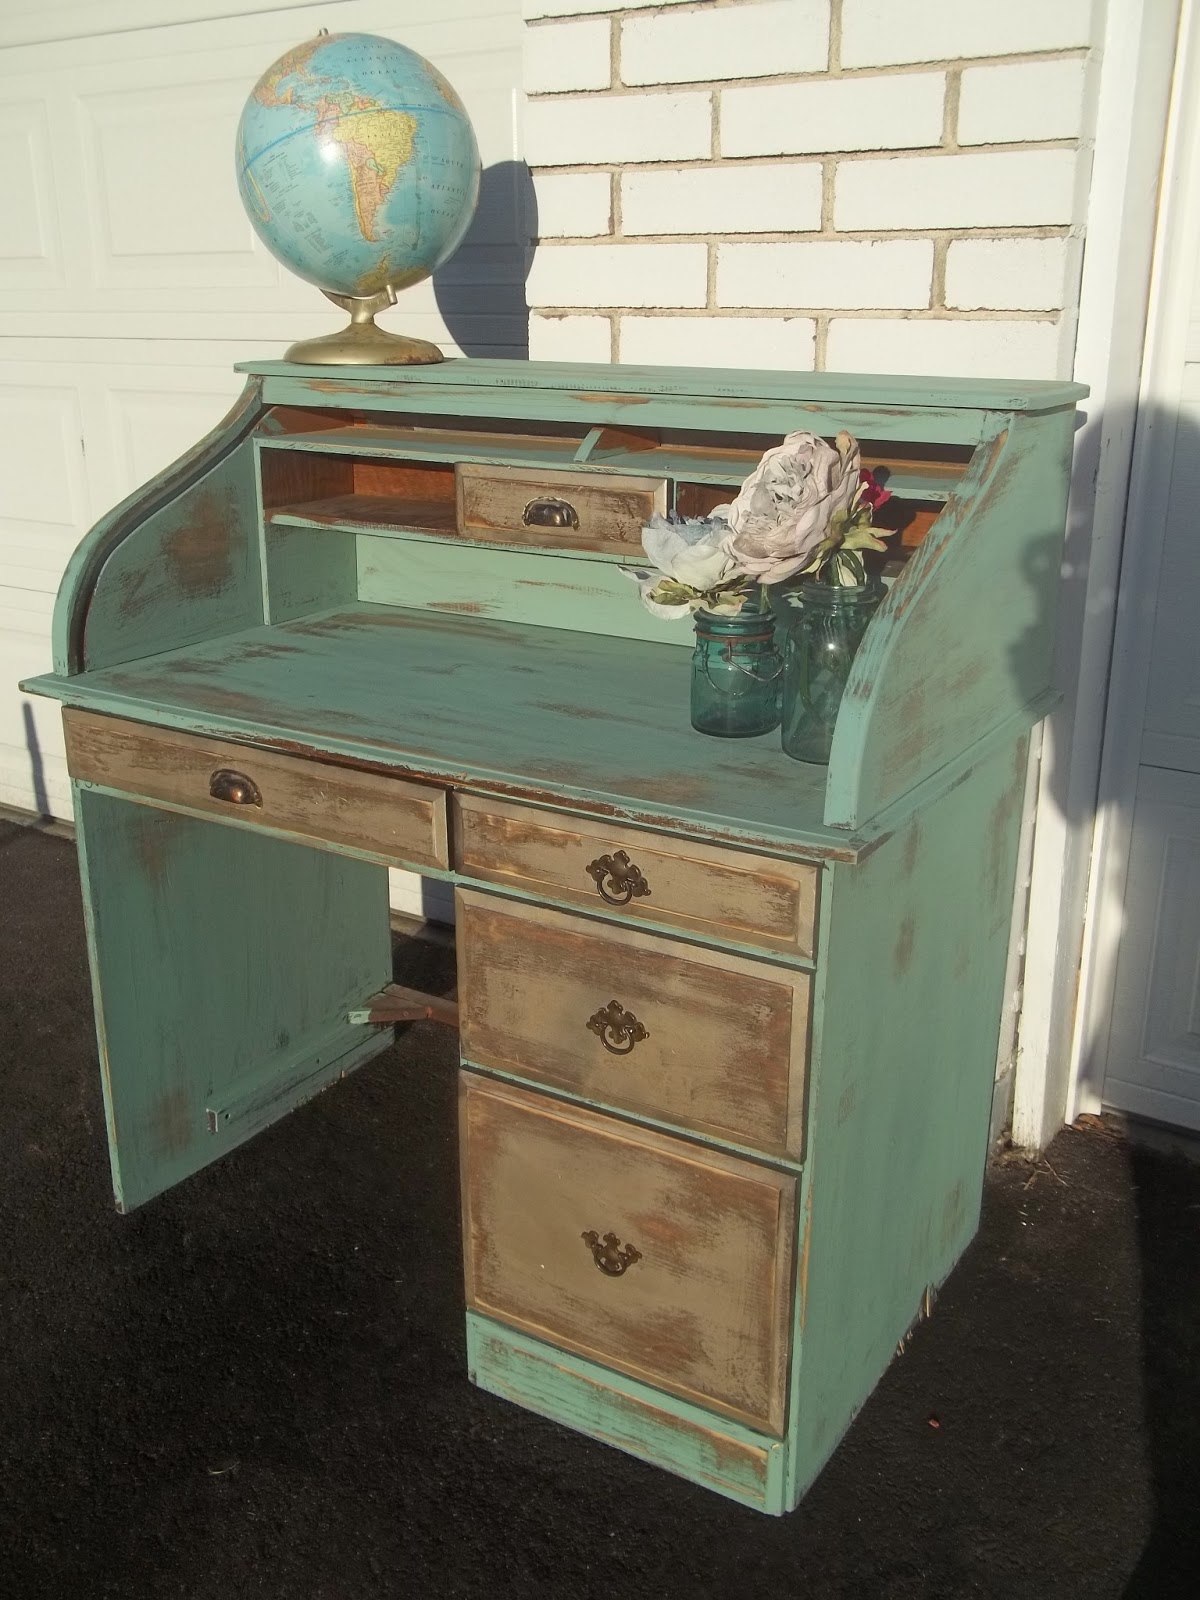 Thrifty Fabulous Gorgeous Distressed Turquoise Gold Shabby Chic